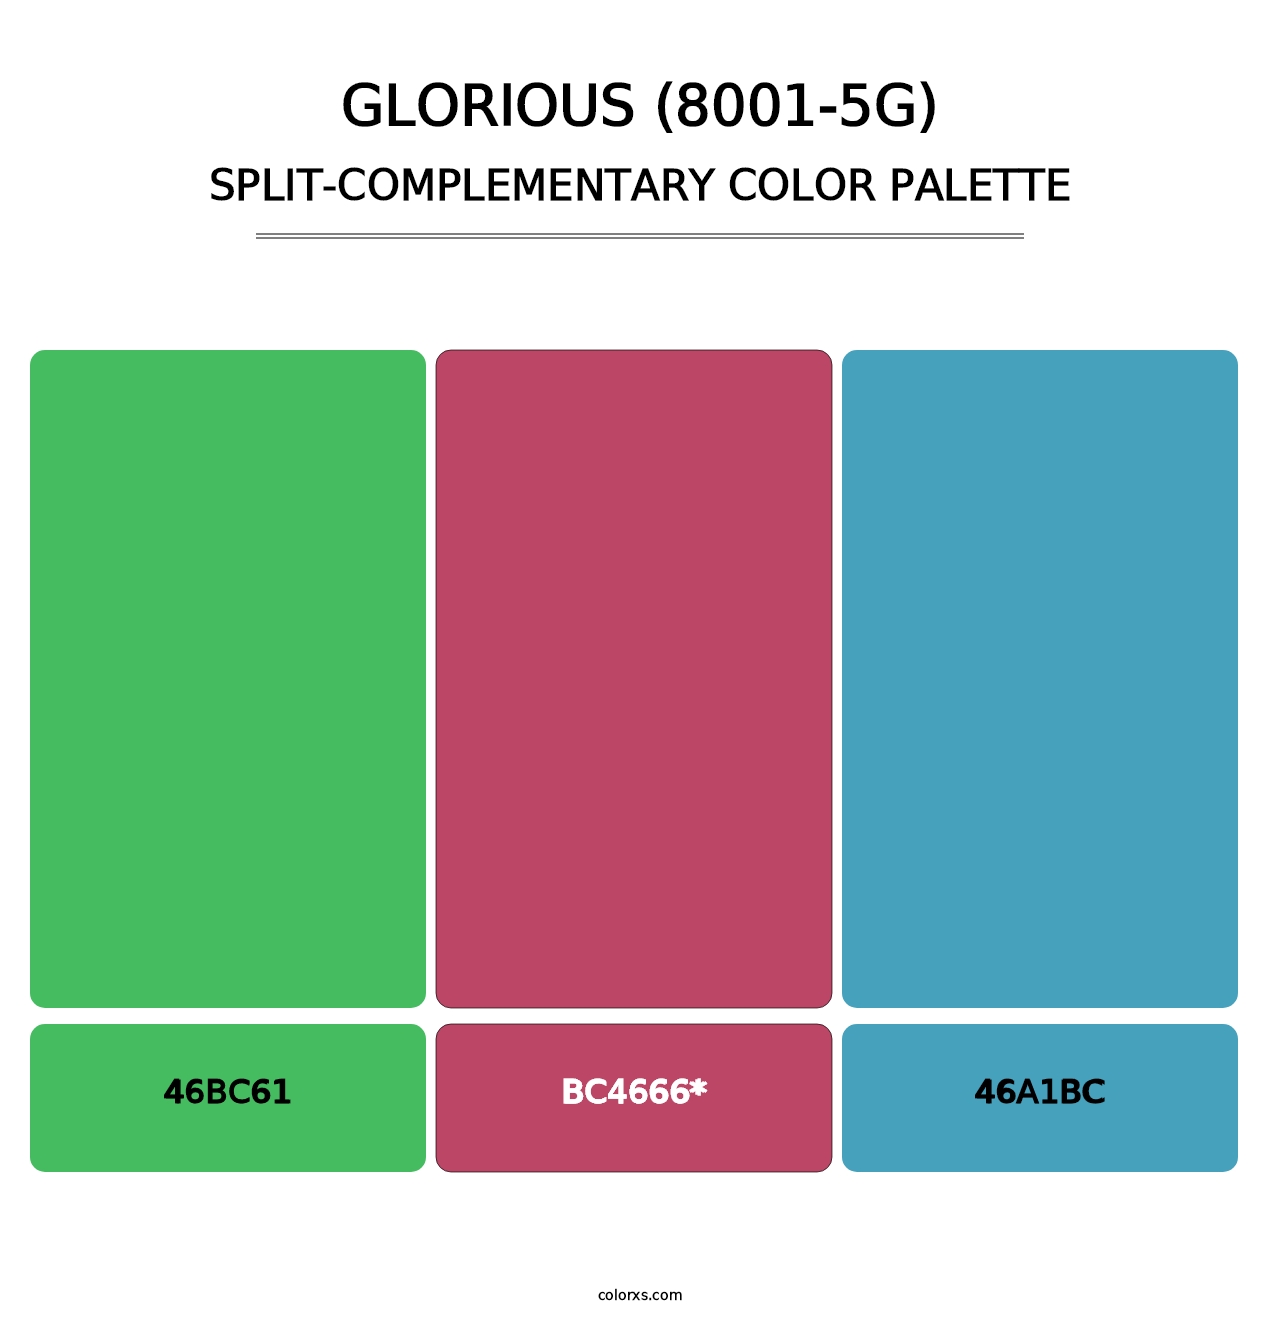 Glorious (8001-5G) - Split-Complementary Color Palette